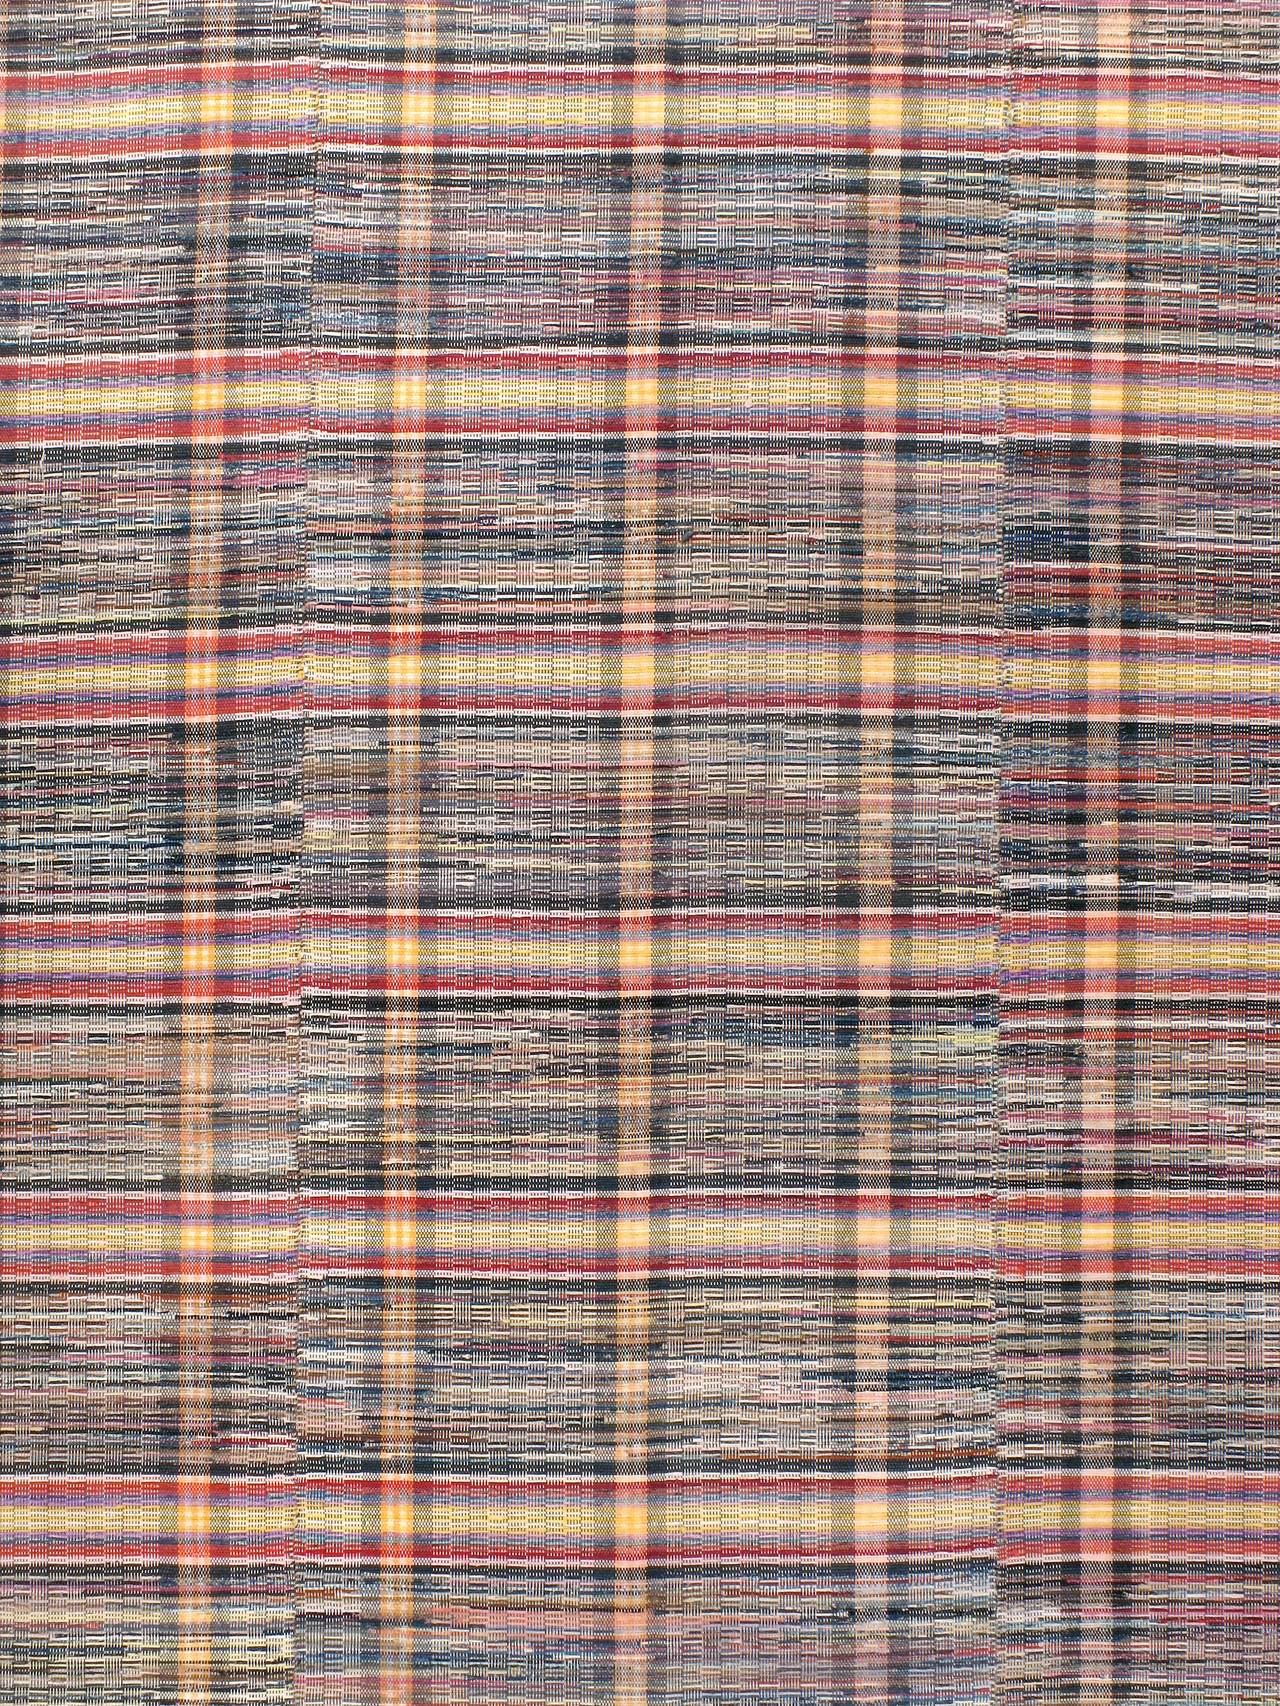 An American mid-20th century rag rug featuring a plaid style pattern.